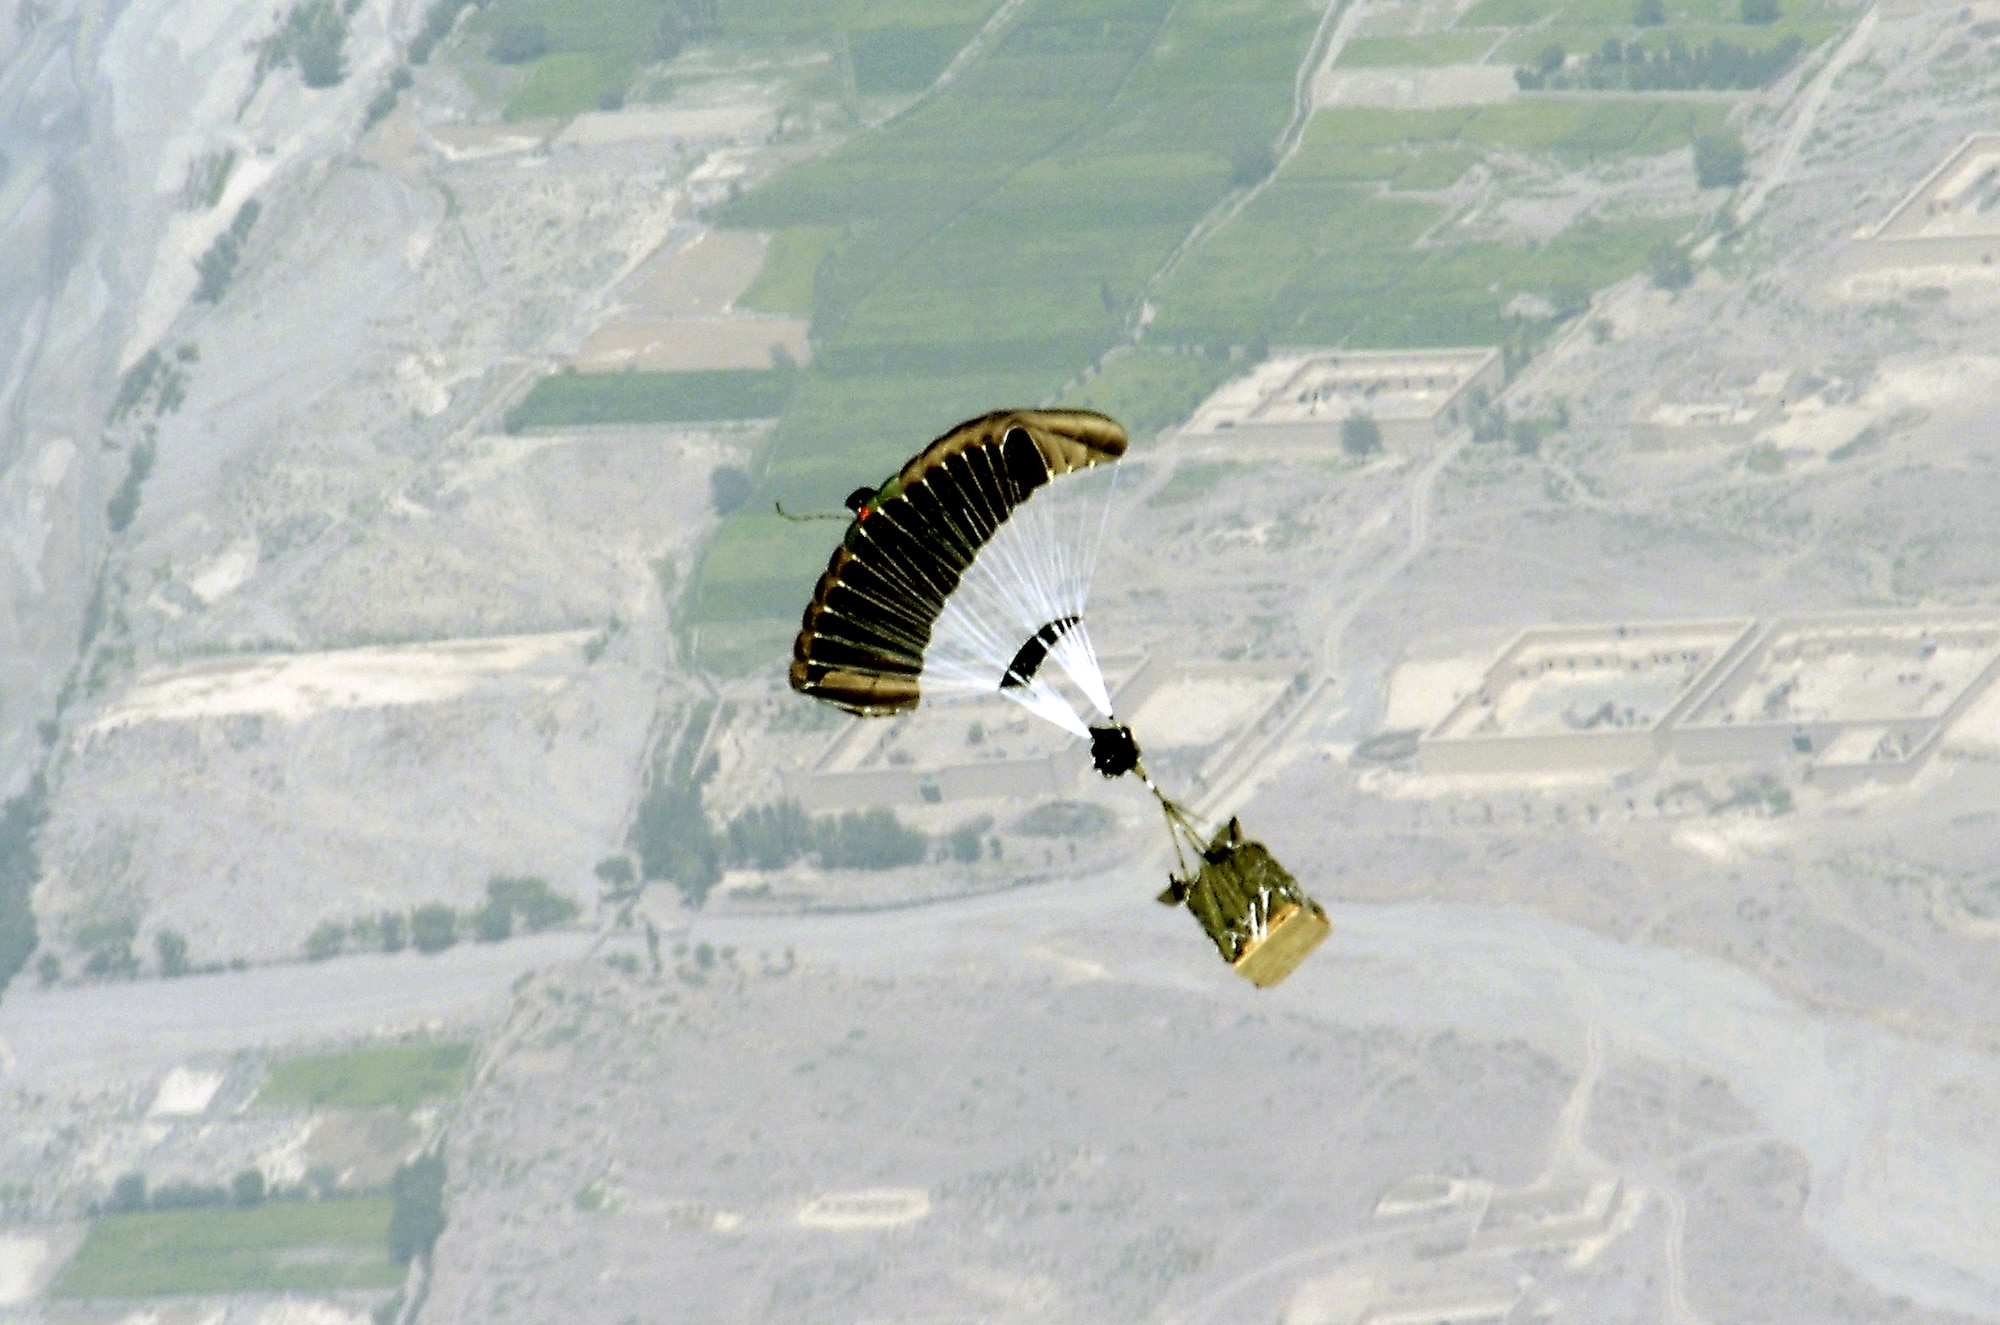 A new Global Positioning System-guided Joint Precision Air Drop System bundle, known as Screamer 2K, floats to the ground after being dropped from the back of a C-130 Hercules over Afghanistan Aug. 31. The drop was made from 17,500 feet above sea level, and was the first joint Air Force-Army operational drop of JPADS in the U.S. Central Command area of responsibility. Four bundles were dropped from the Alaska Air National Guard C-130. All four bundles arrived at the drop zone, resupplying Army troops on the ground with ammunition and water. (U.S. Air Force photo/Senior Airman Brian Ferguson) 